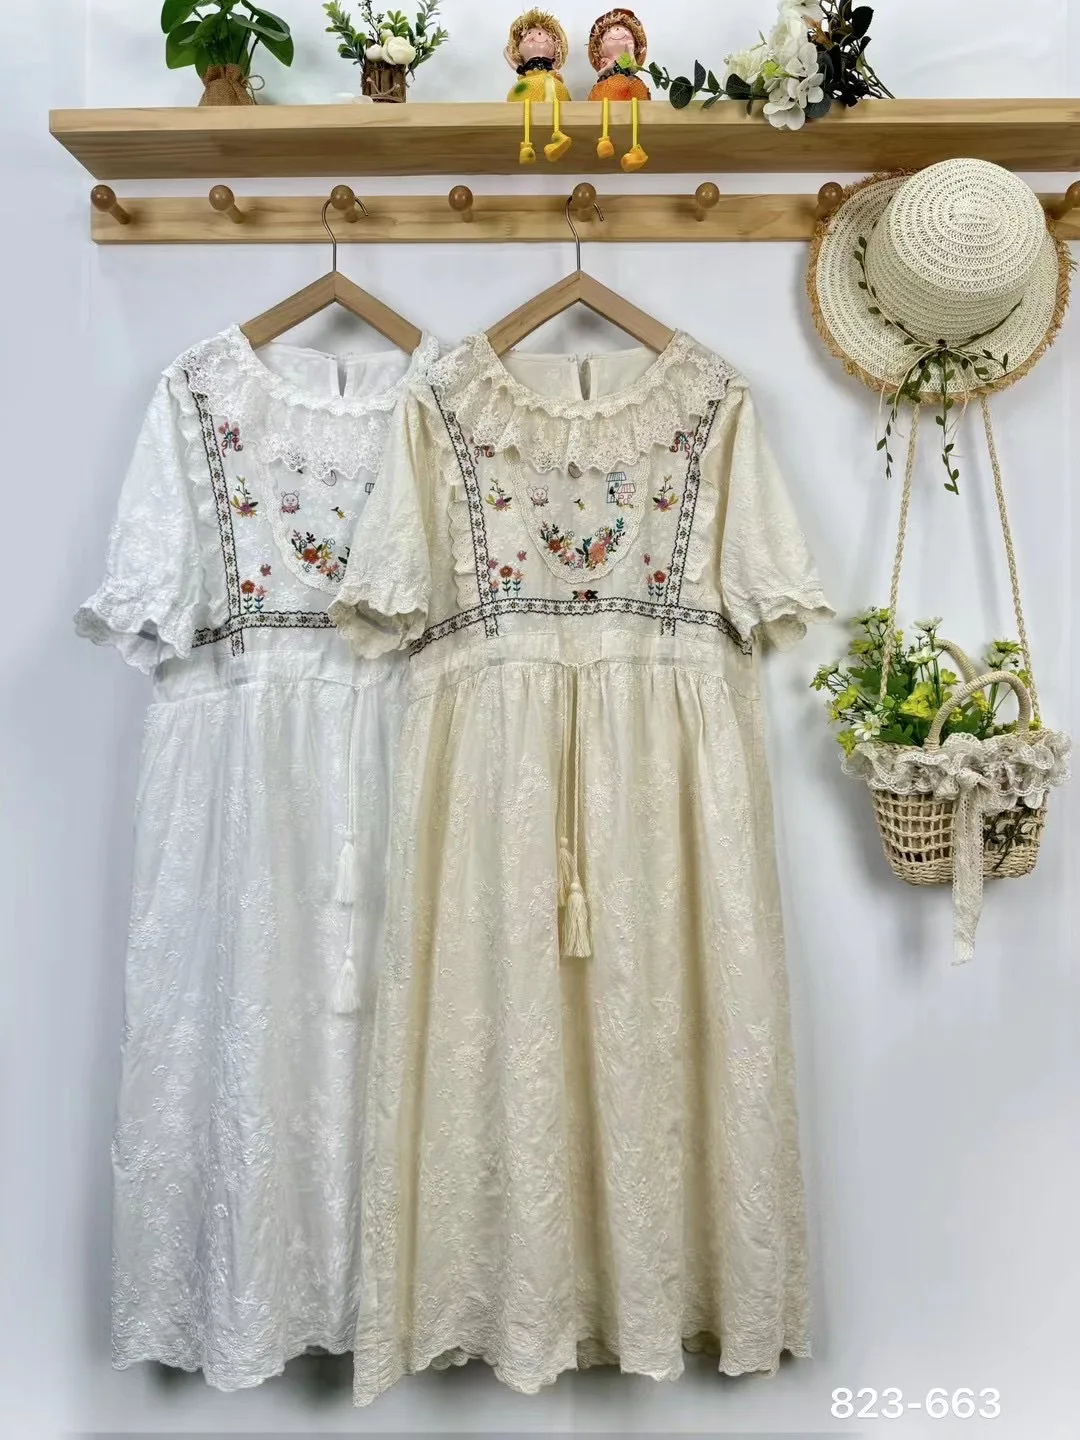 

Mori Kei Clothing Japan Style Vintage Lace Collar Embroidery One-piece Dress for Women Summer Short Sleeve Dress Lolita